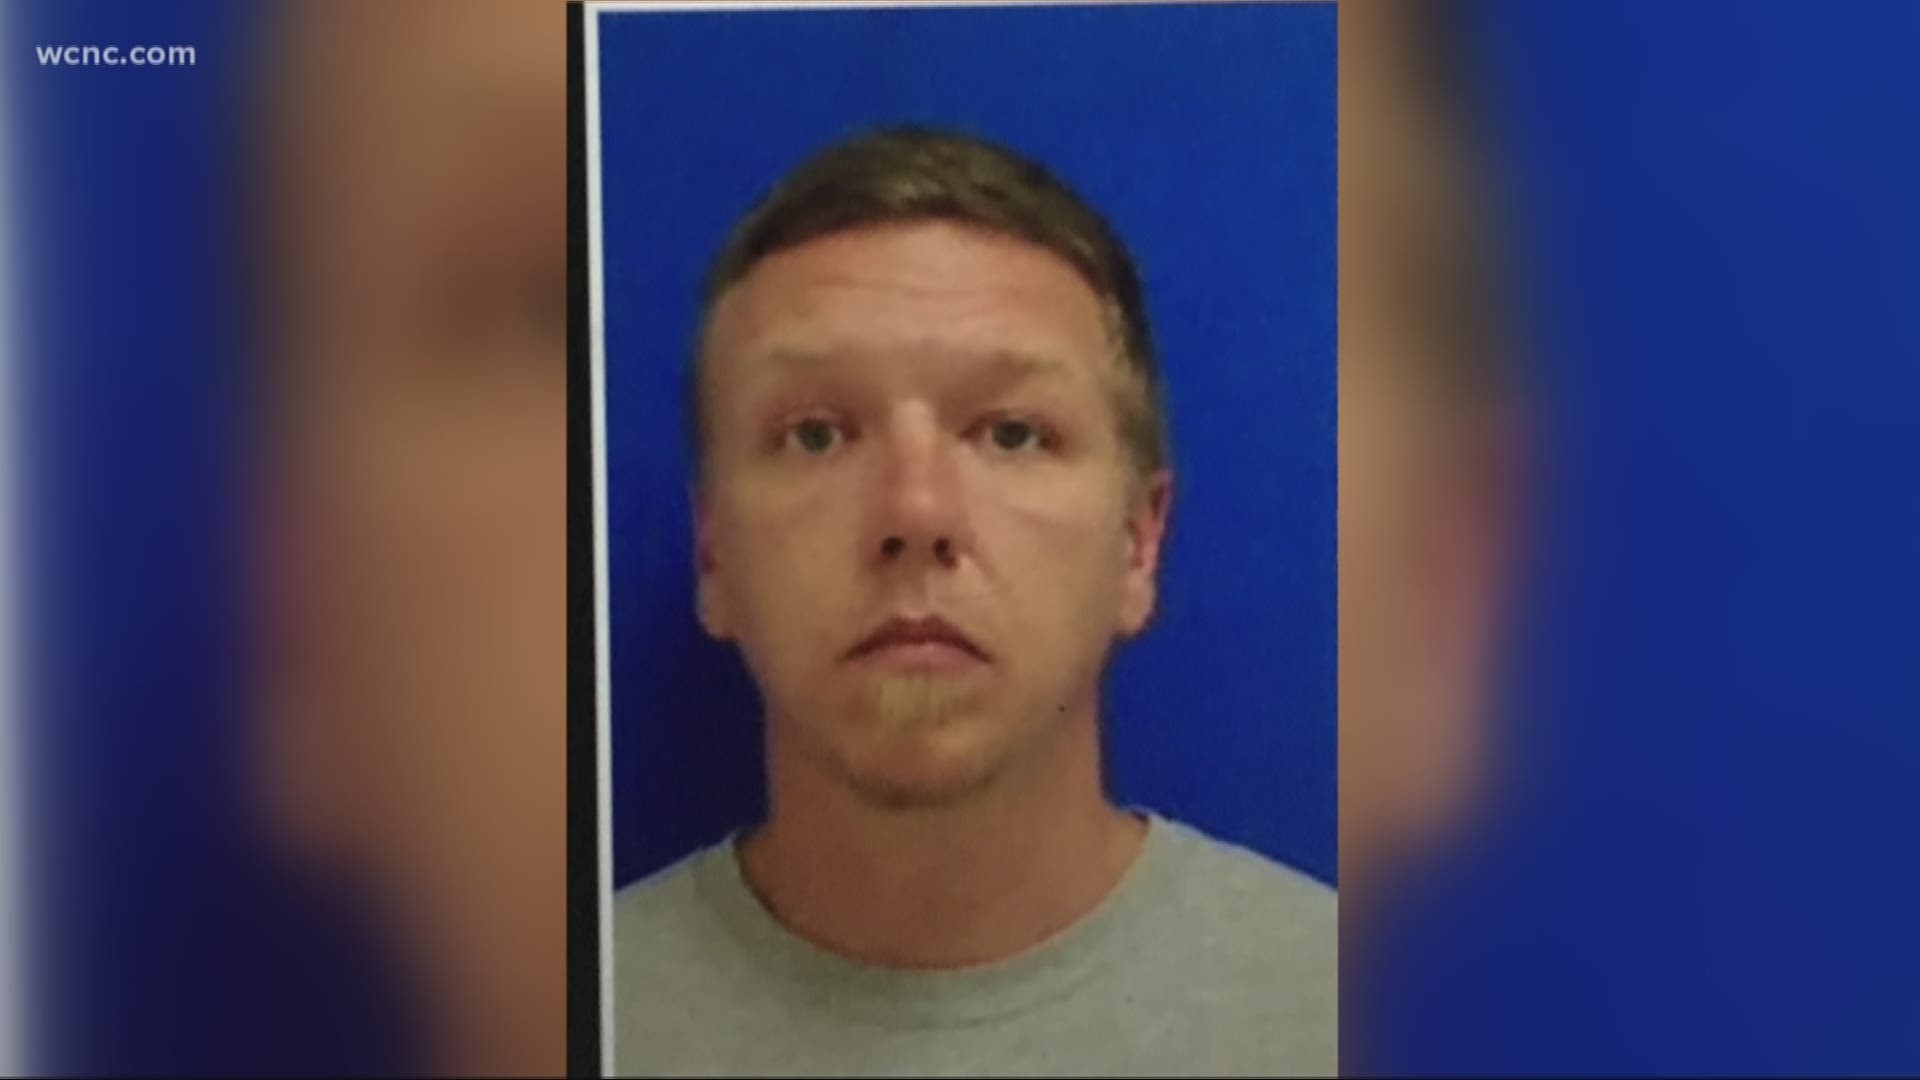 Deputies in Catawba County are searching for the gunman accused of shooting a mother and killing her son in Catawba County Tuesday night.